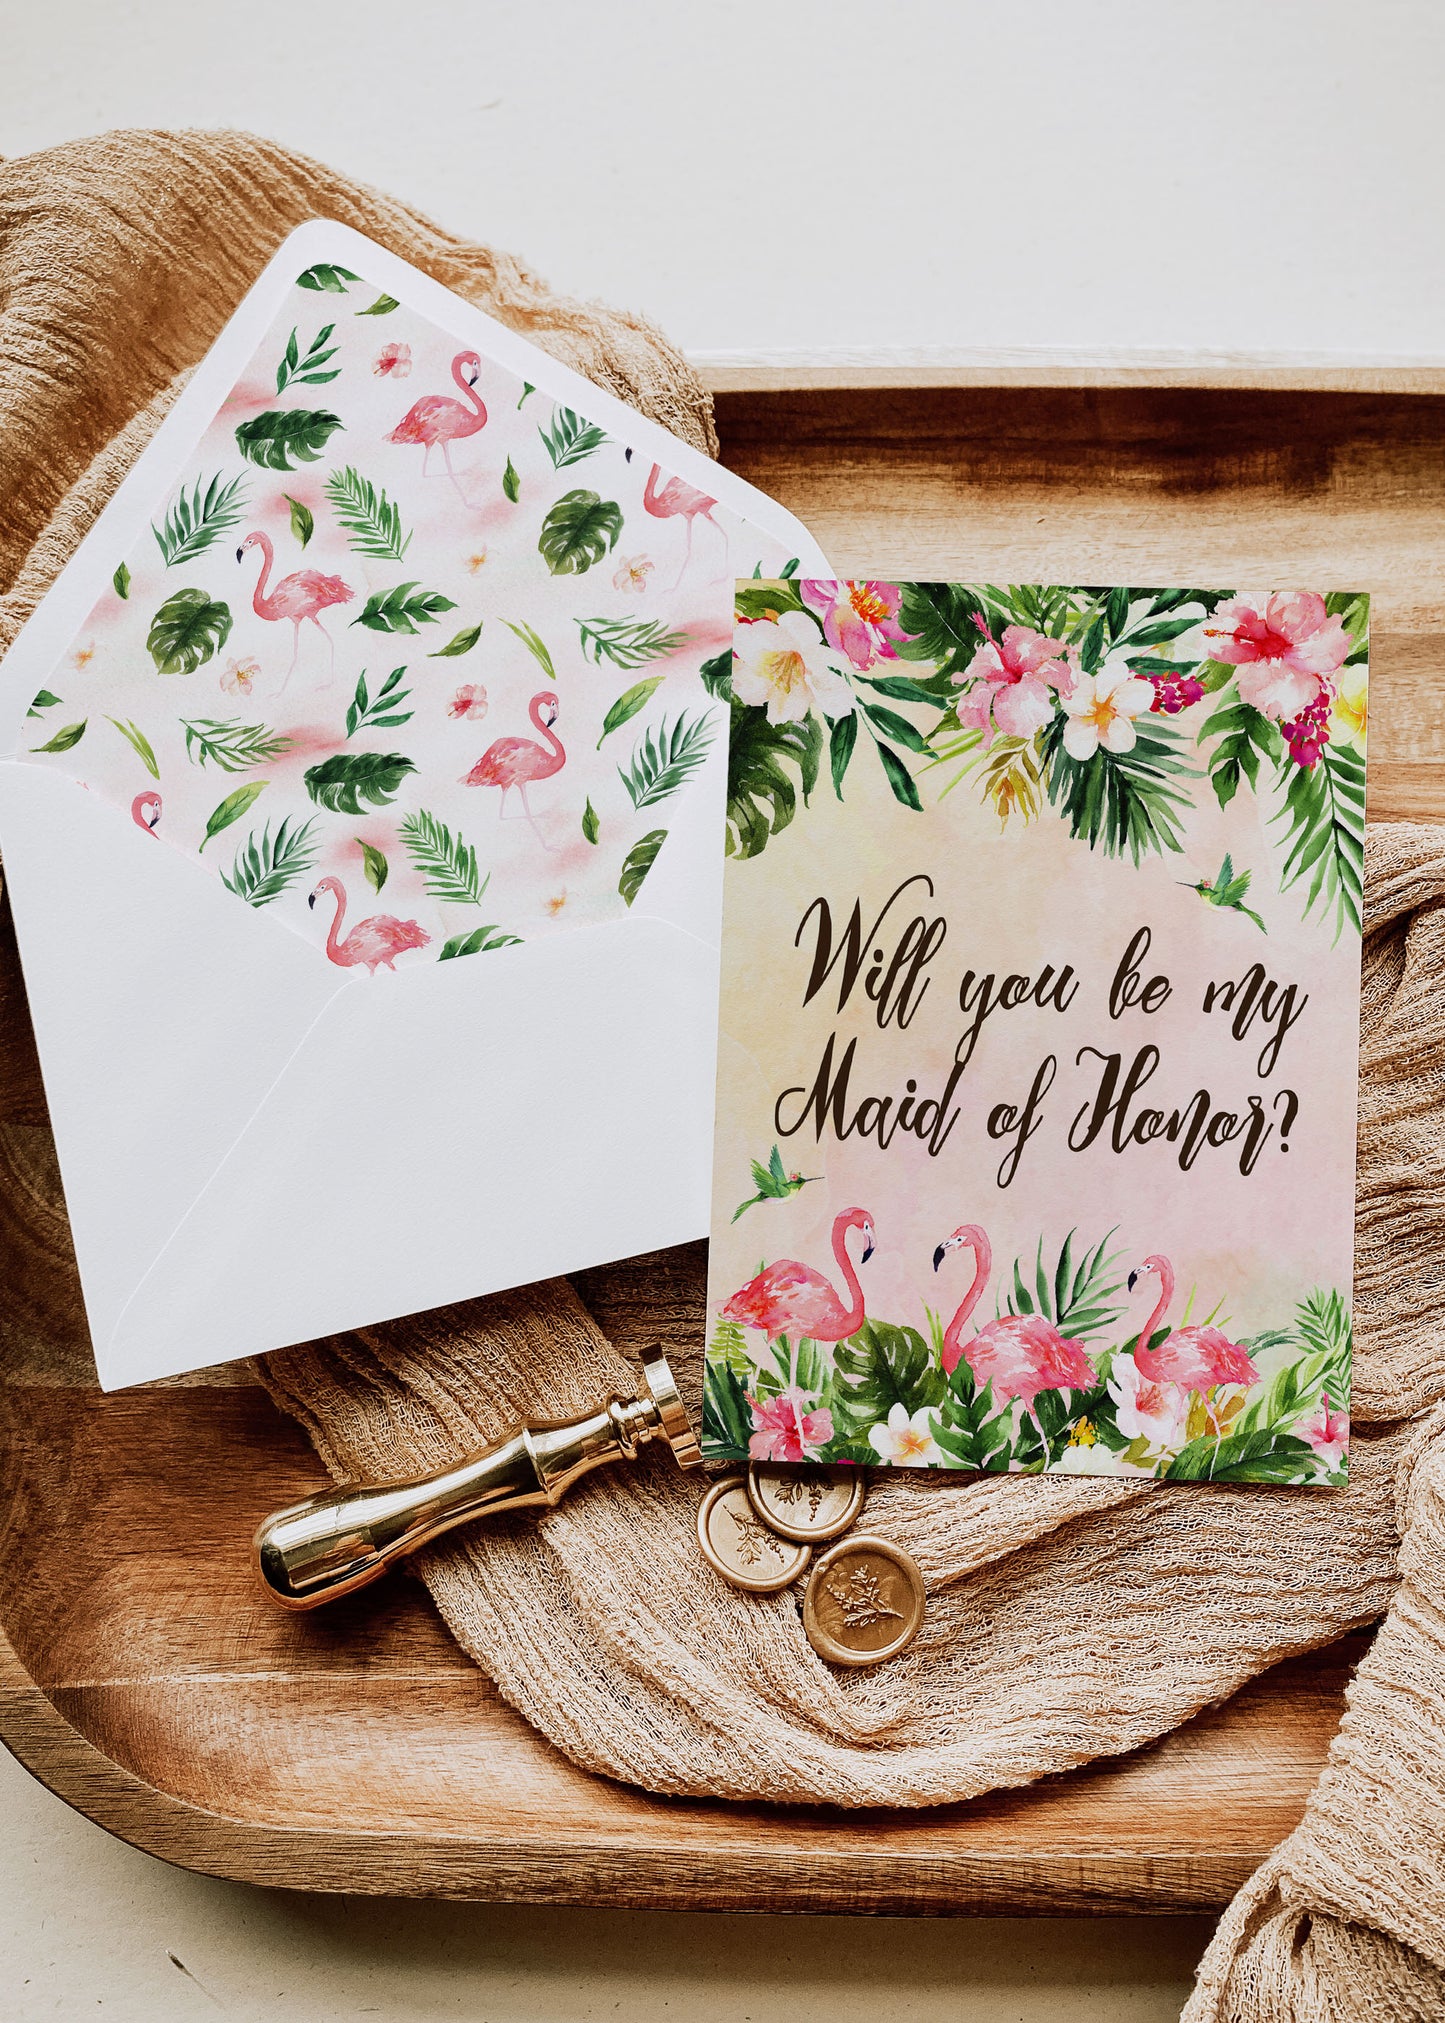 Tropical Floral Watercolor Beach Destination "Will you be my Maid of Honor" Digital "Instant Download" Invitation 3 - 'TROPICAL LUSH"